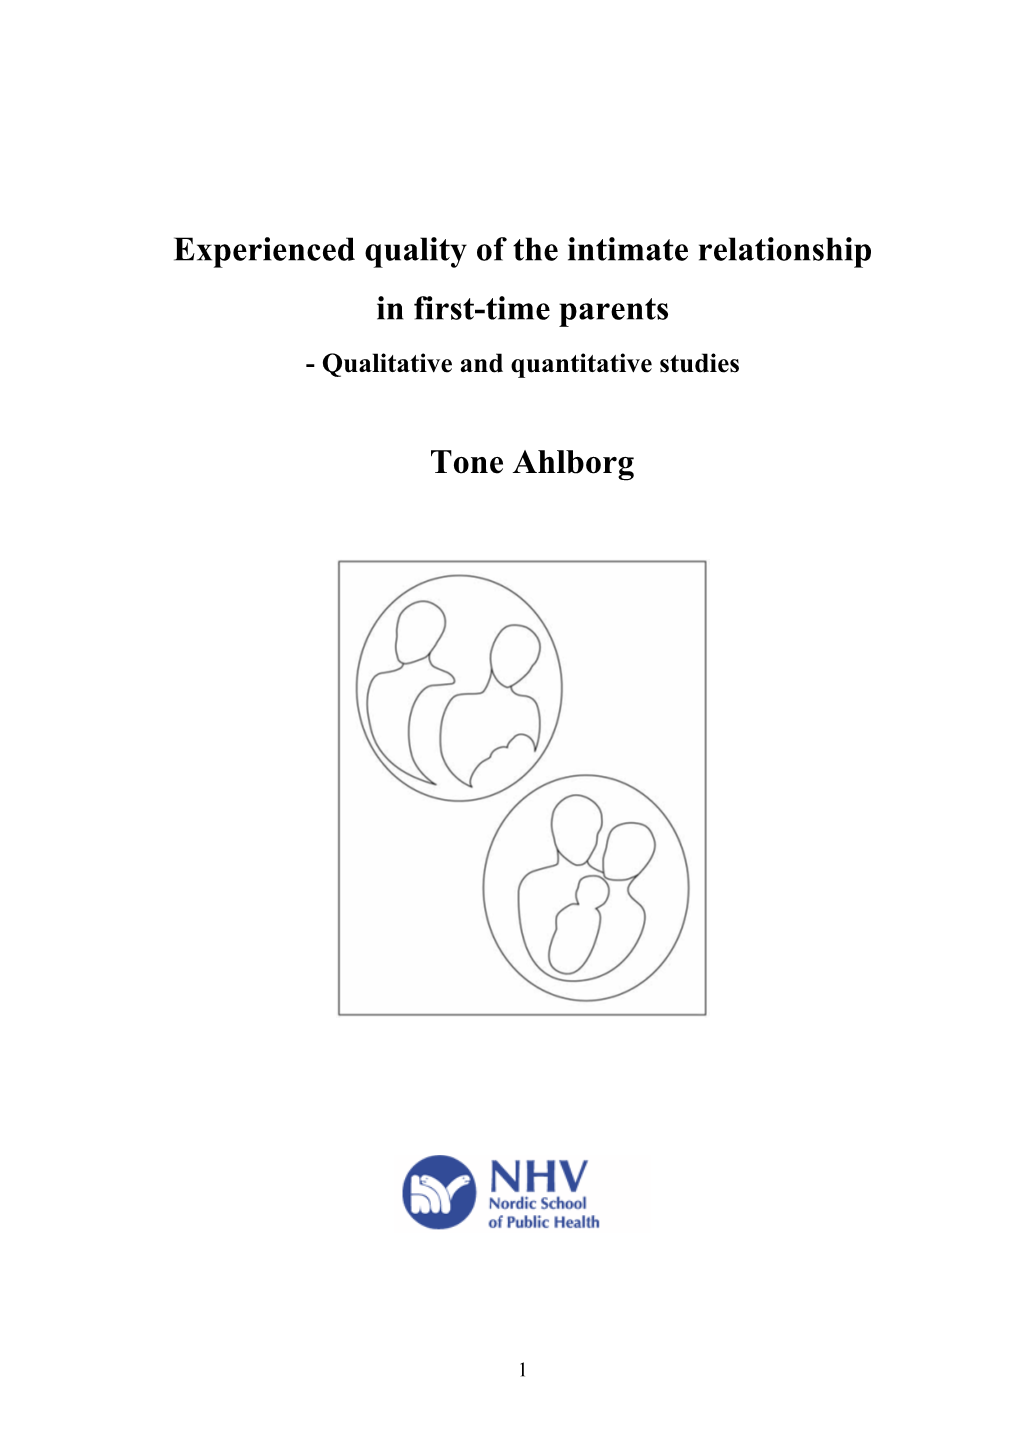 Experienced Quality of the Intimate Relationship in First-Time Parents - Qualitative and Quantitative Studies